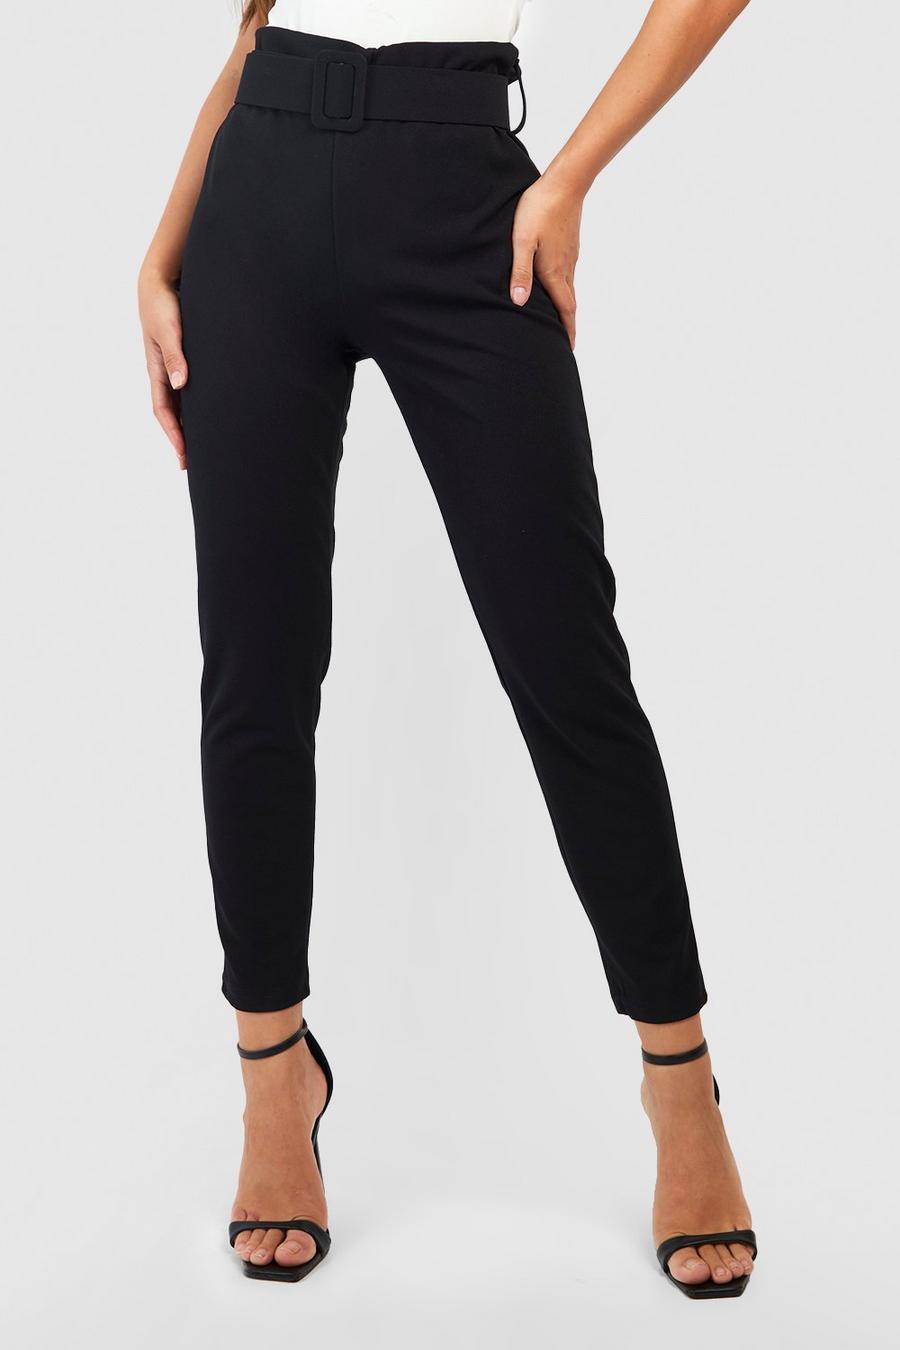 Black High Waisted Buckle Belted Cigarette Trousers image number 1